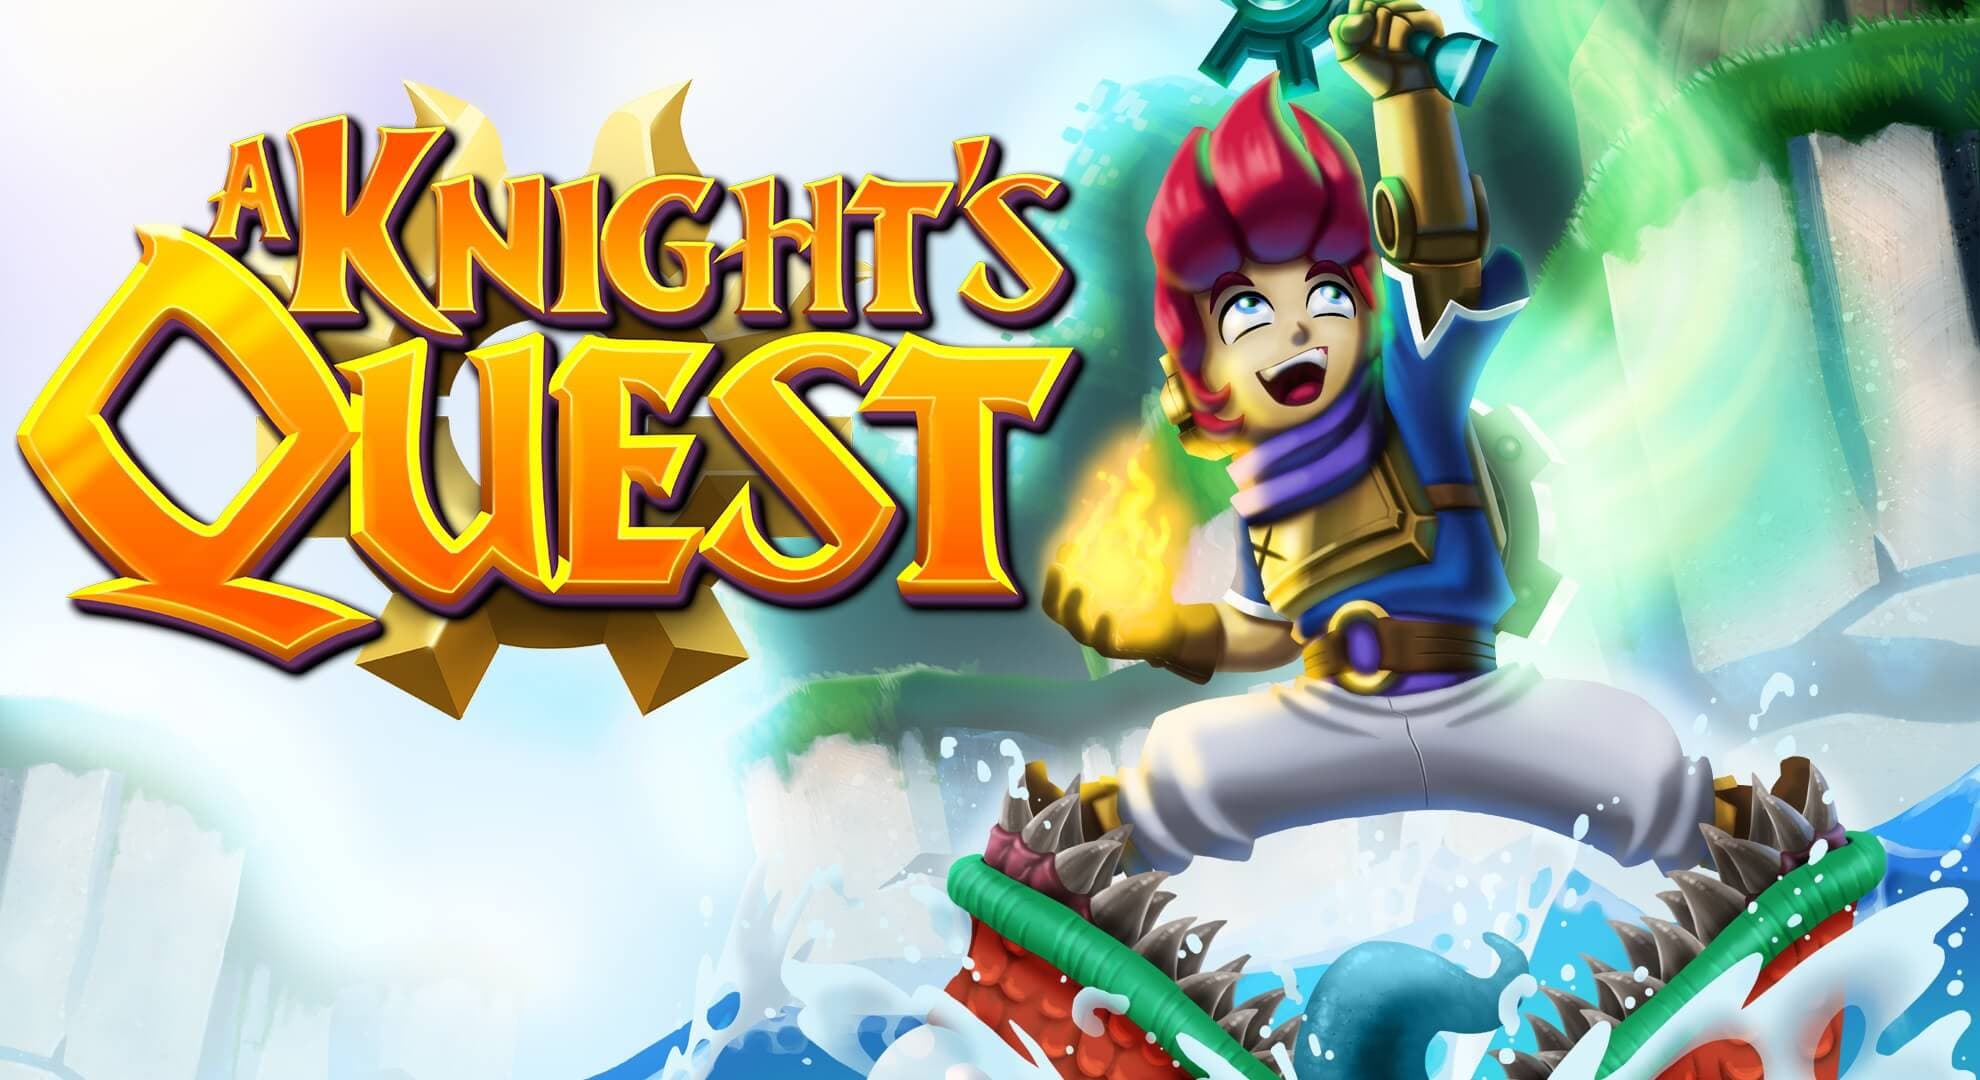 Jaquette A Knight's Quest